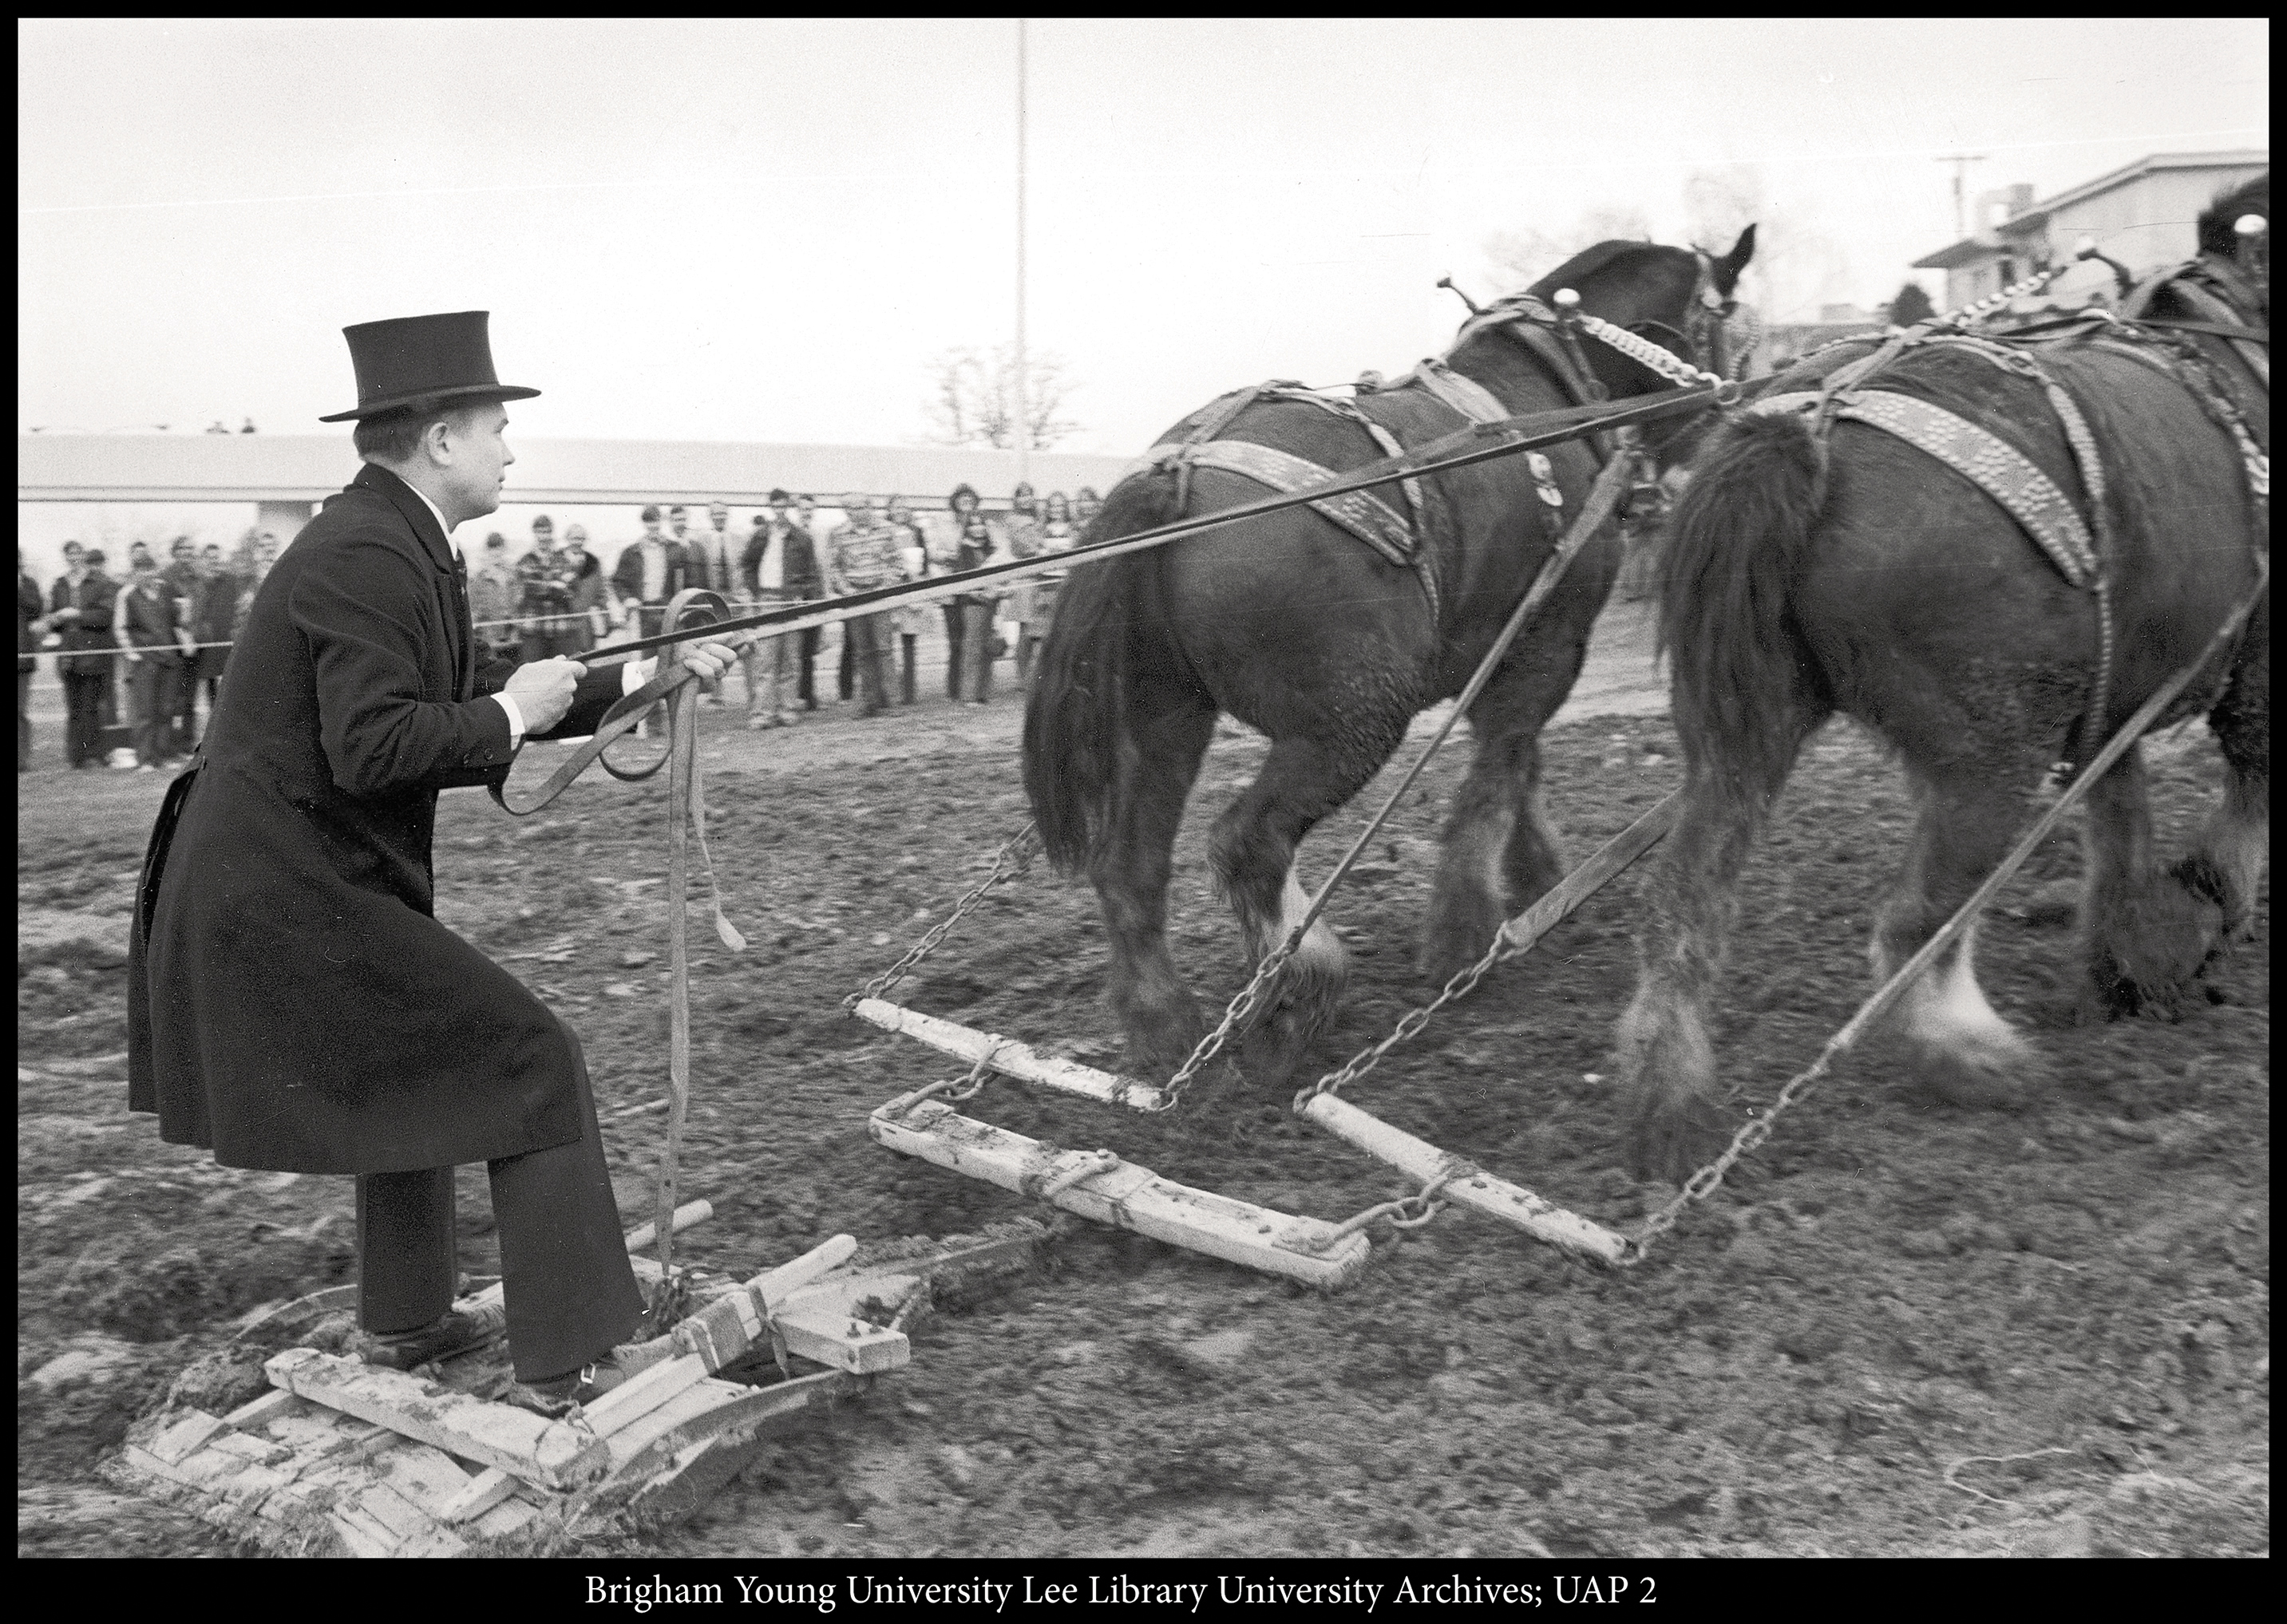 Dressed in 19th-century costume, President Dallin H. Oaks (BS ’54) rides a scraper behind a team of Clydesdales, helping break ground for the Centennial Carillon Tower on Feb. 13, 1975.